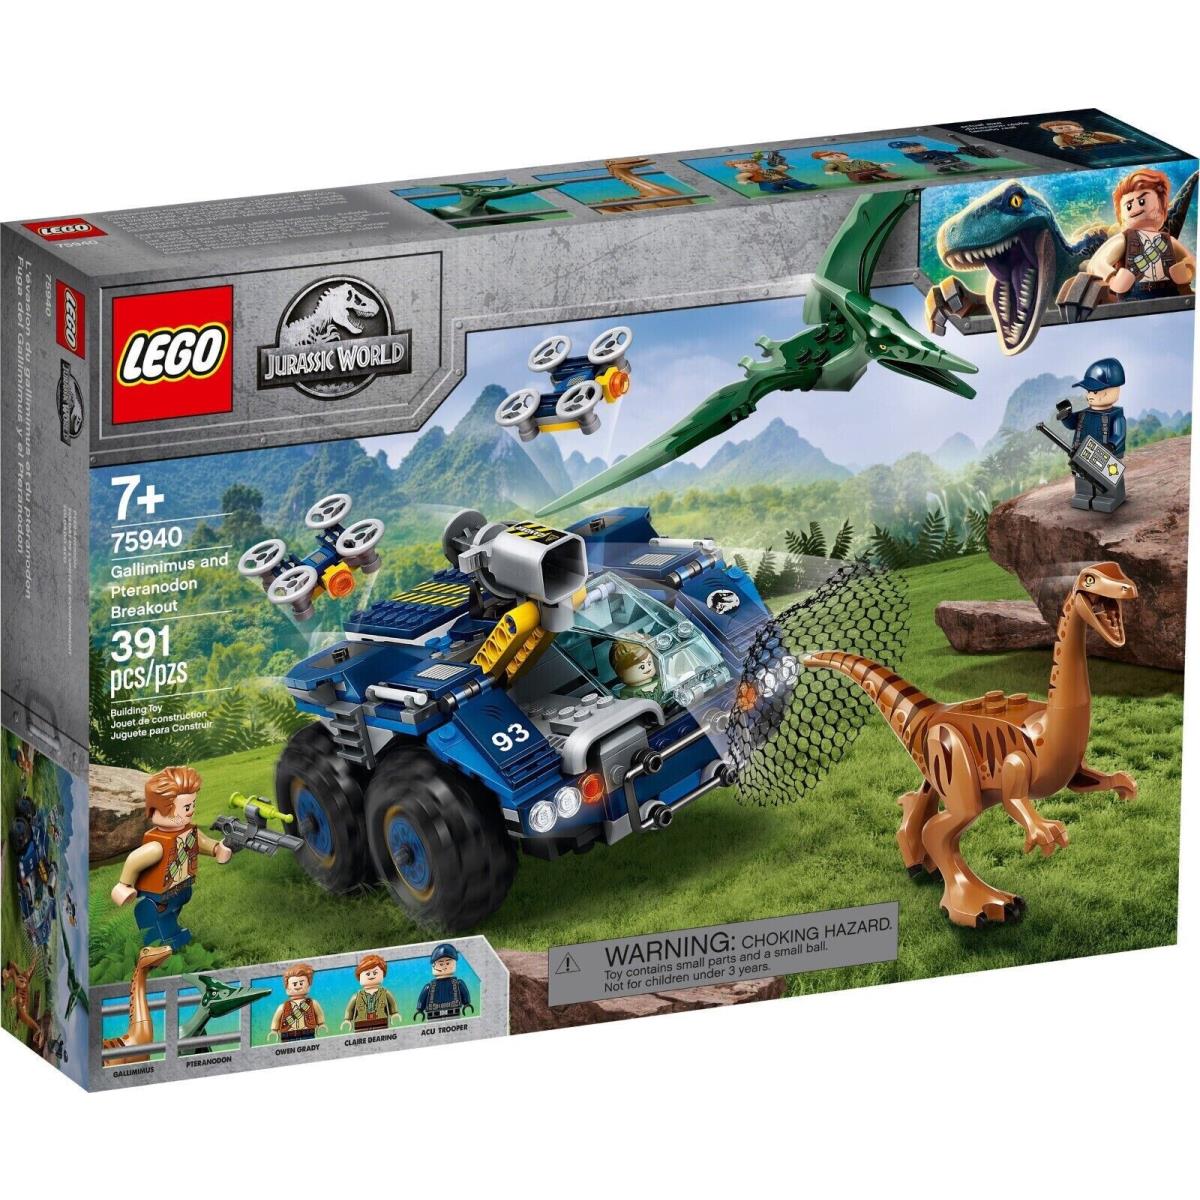 Lego Jurassic World 75940 Gallimimus and Pteranodon Breakout Building Set